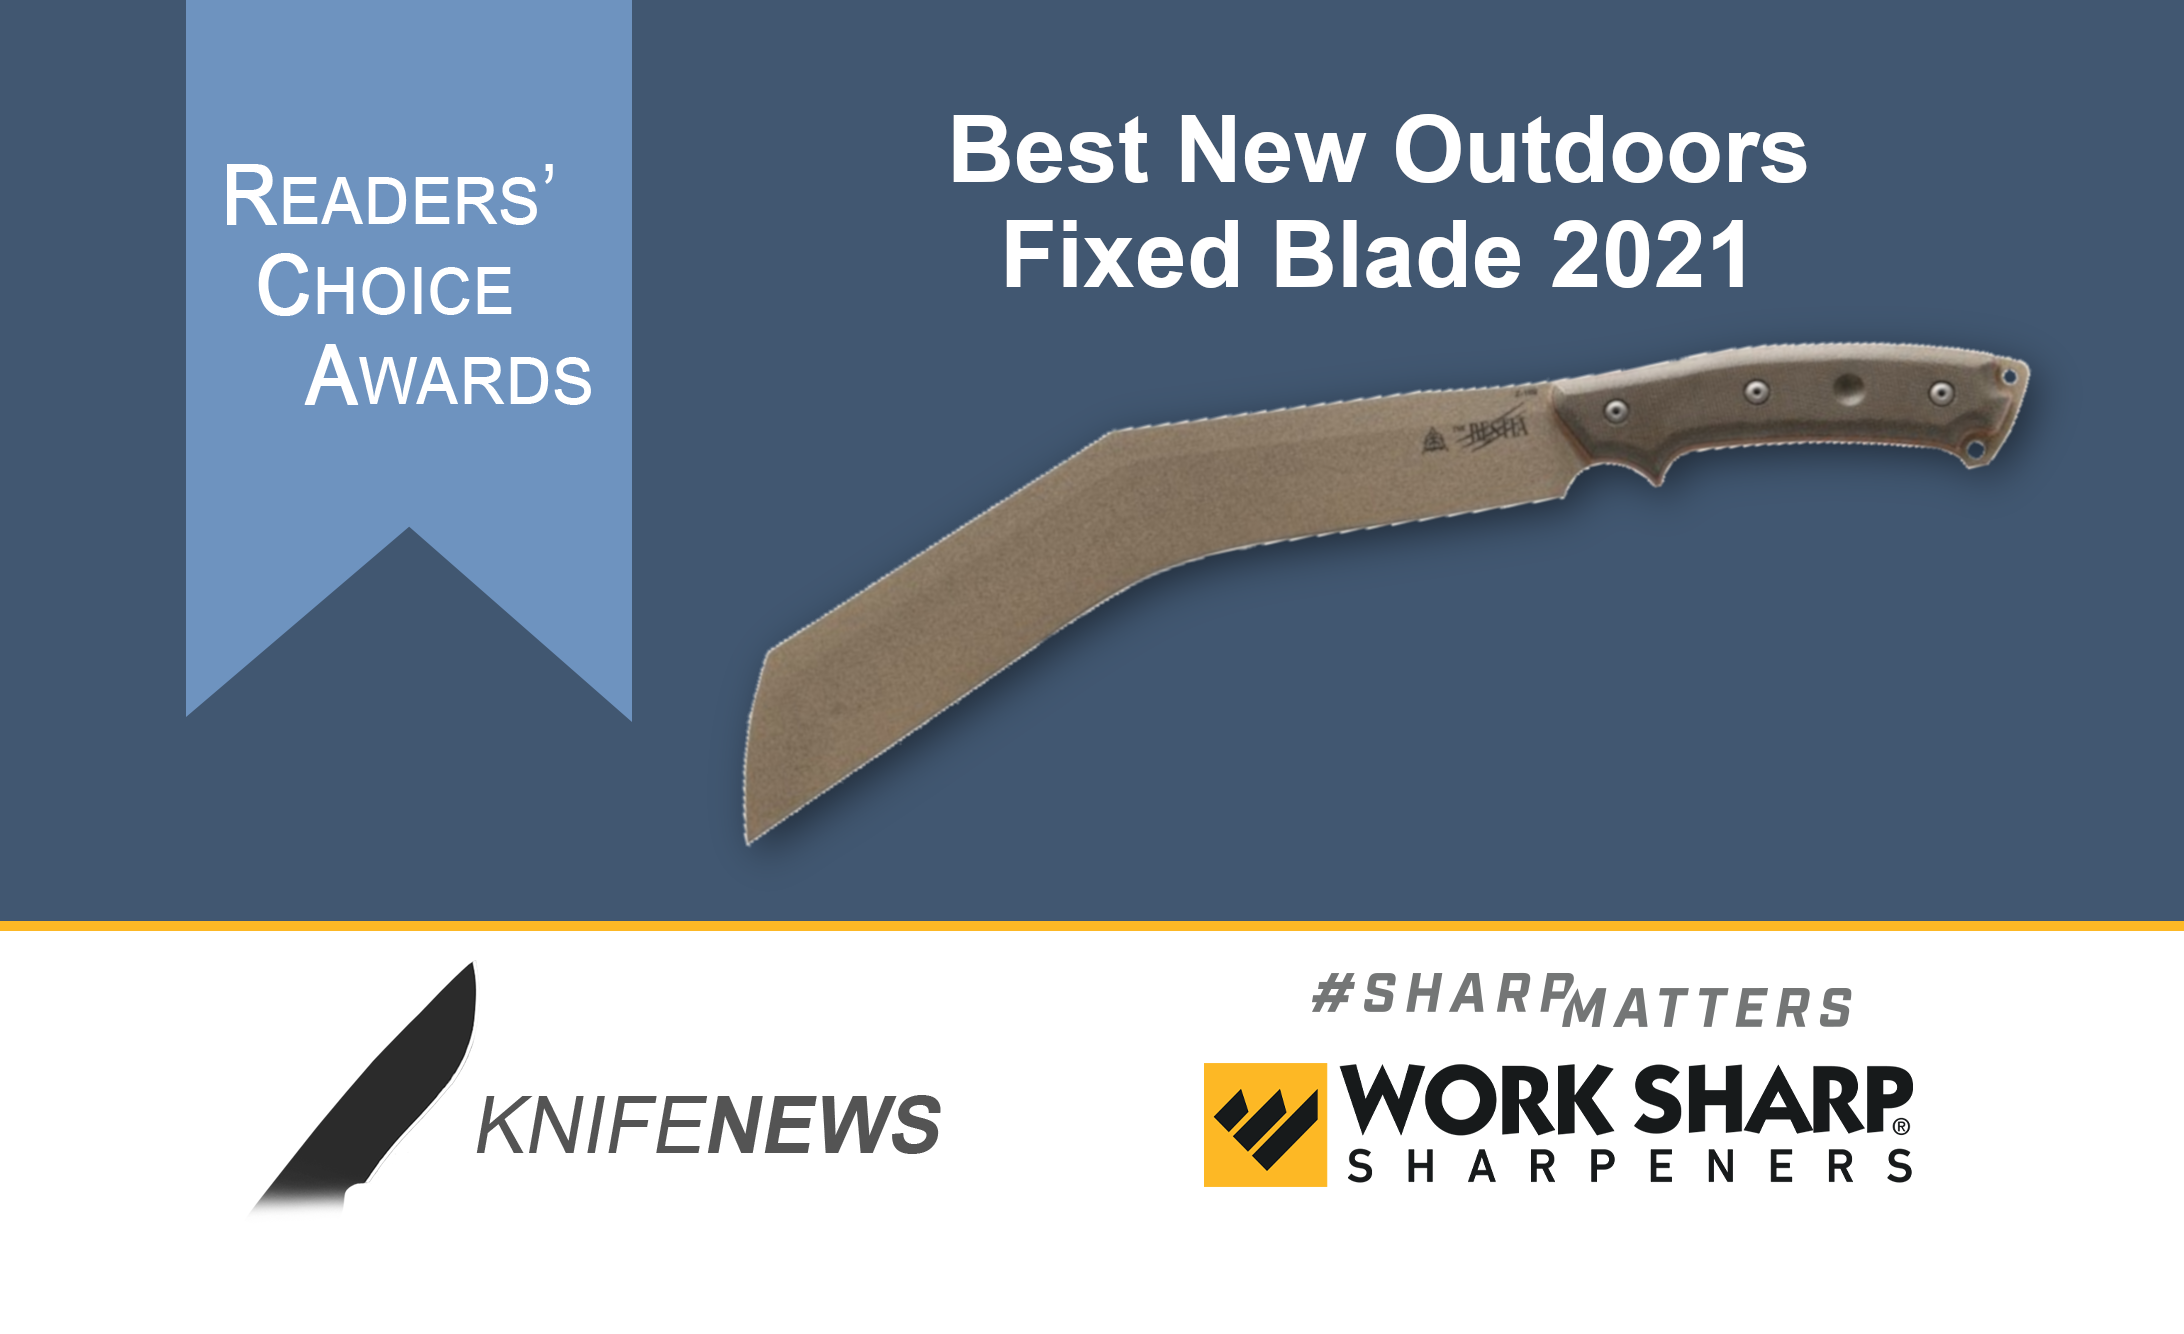 TOPS Bestia Voted Best Outdoors Fixed Blade 2021